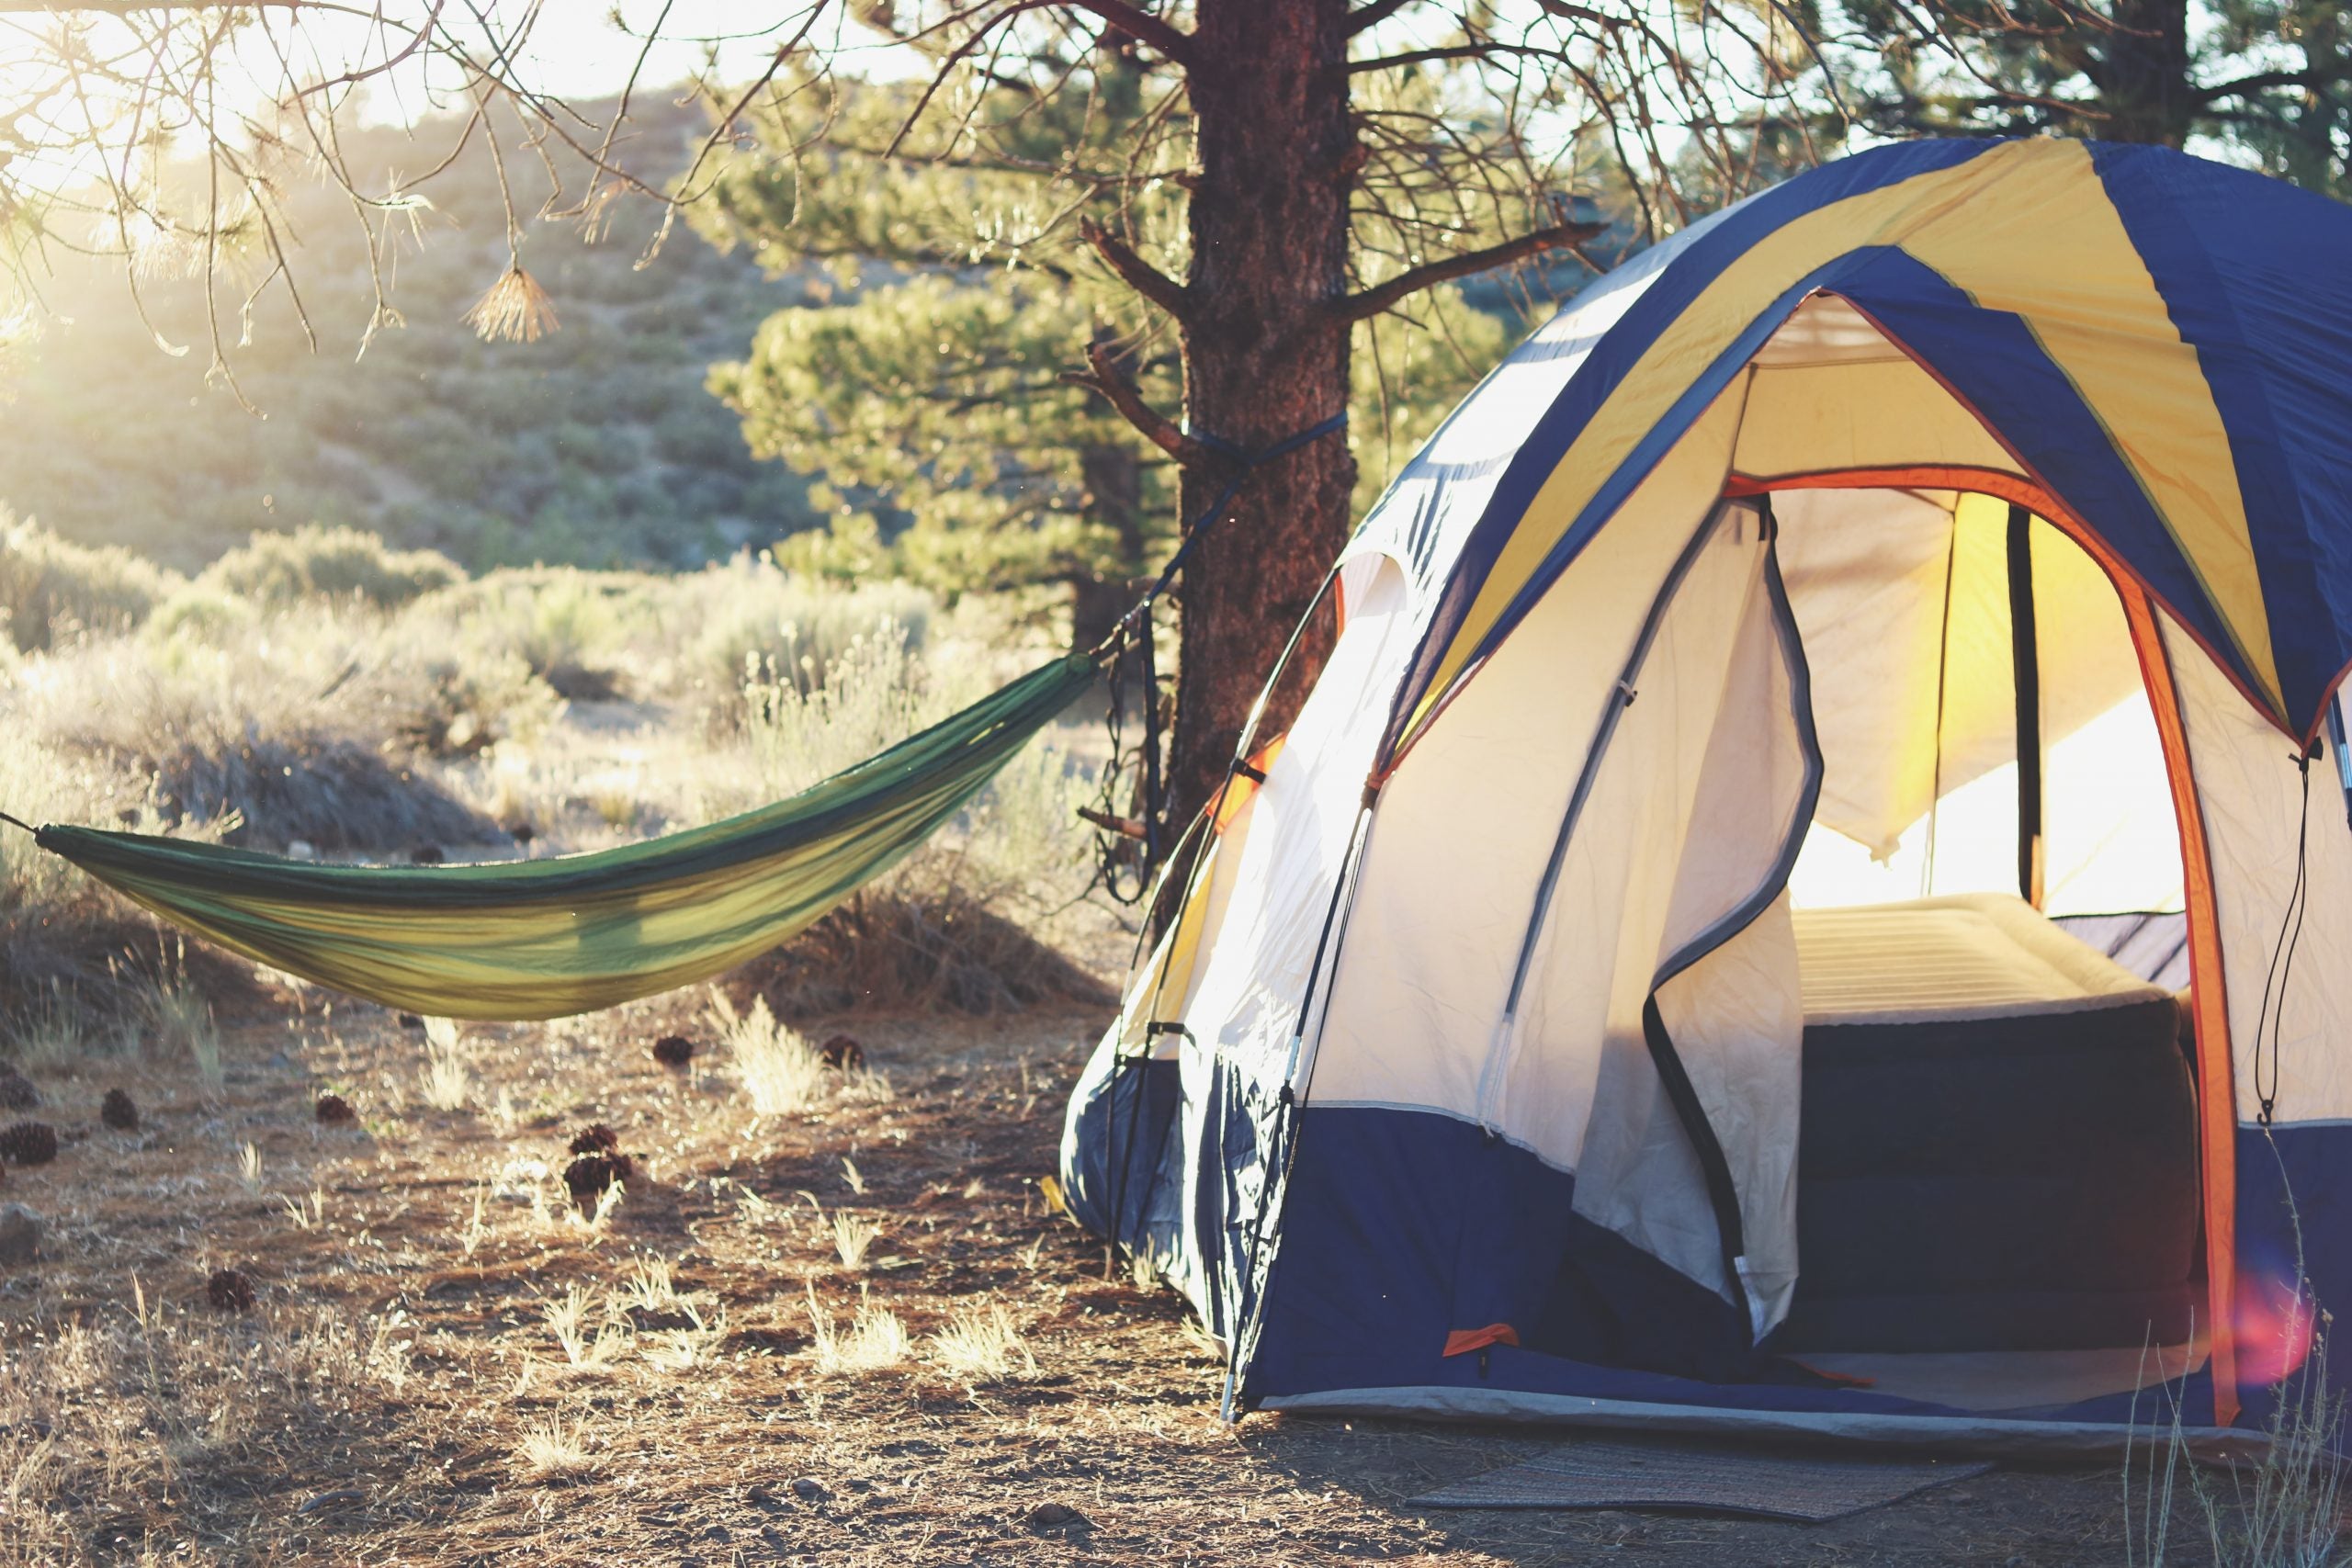 Why Go Outdoor Camping During Holidays?